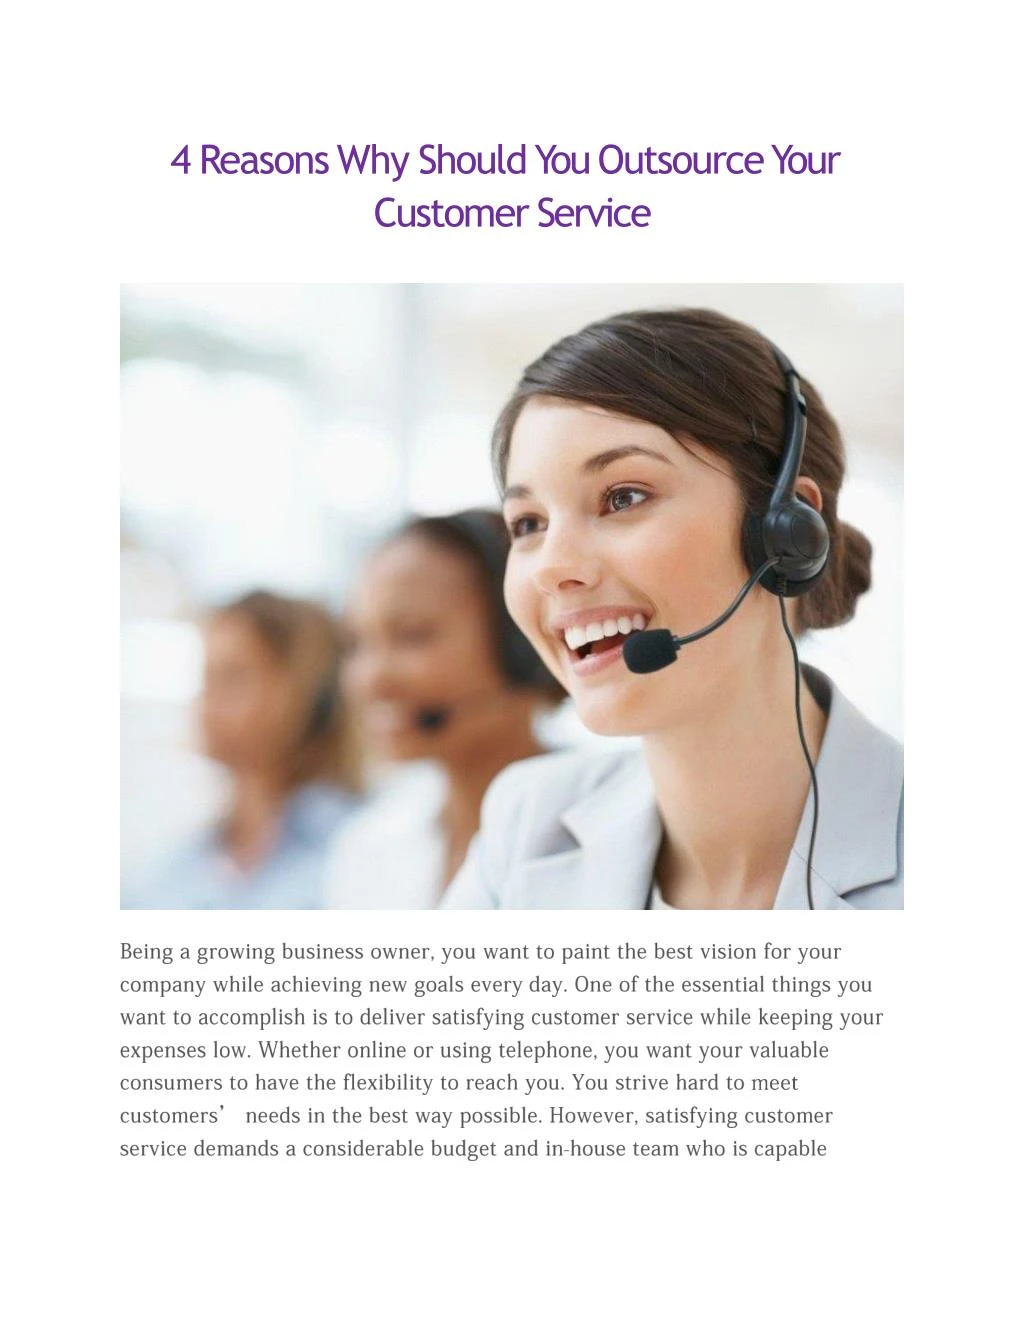 4 reasons why should you outsource your customer